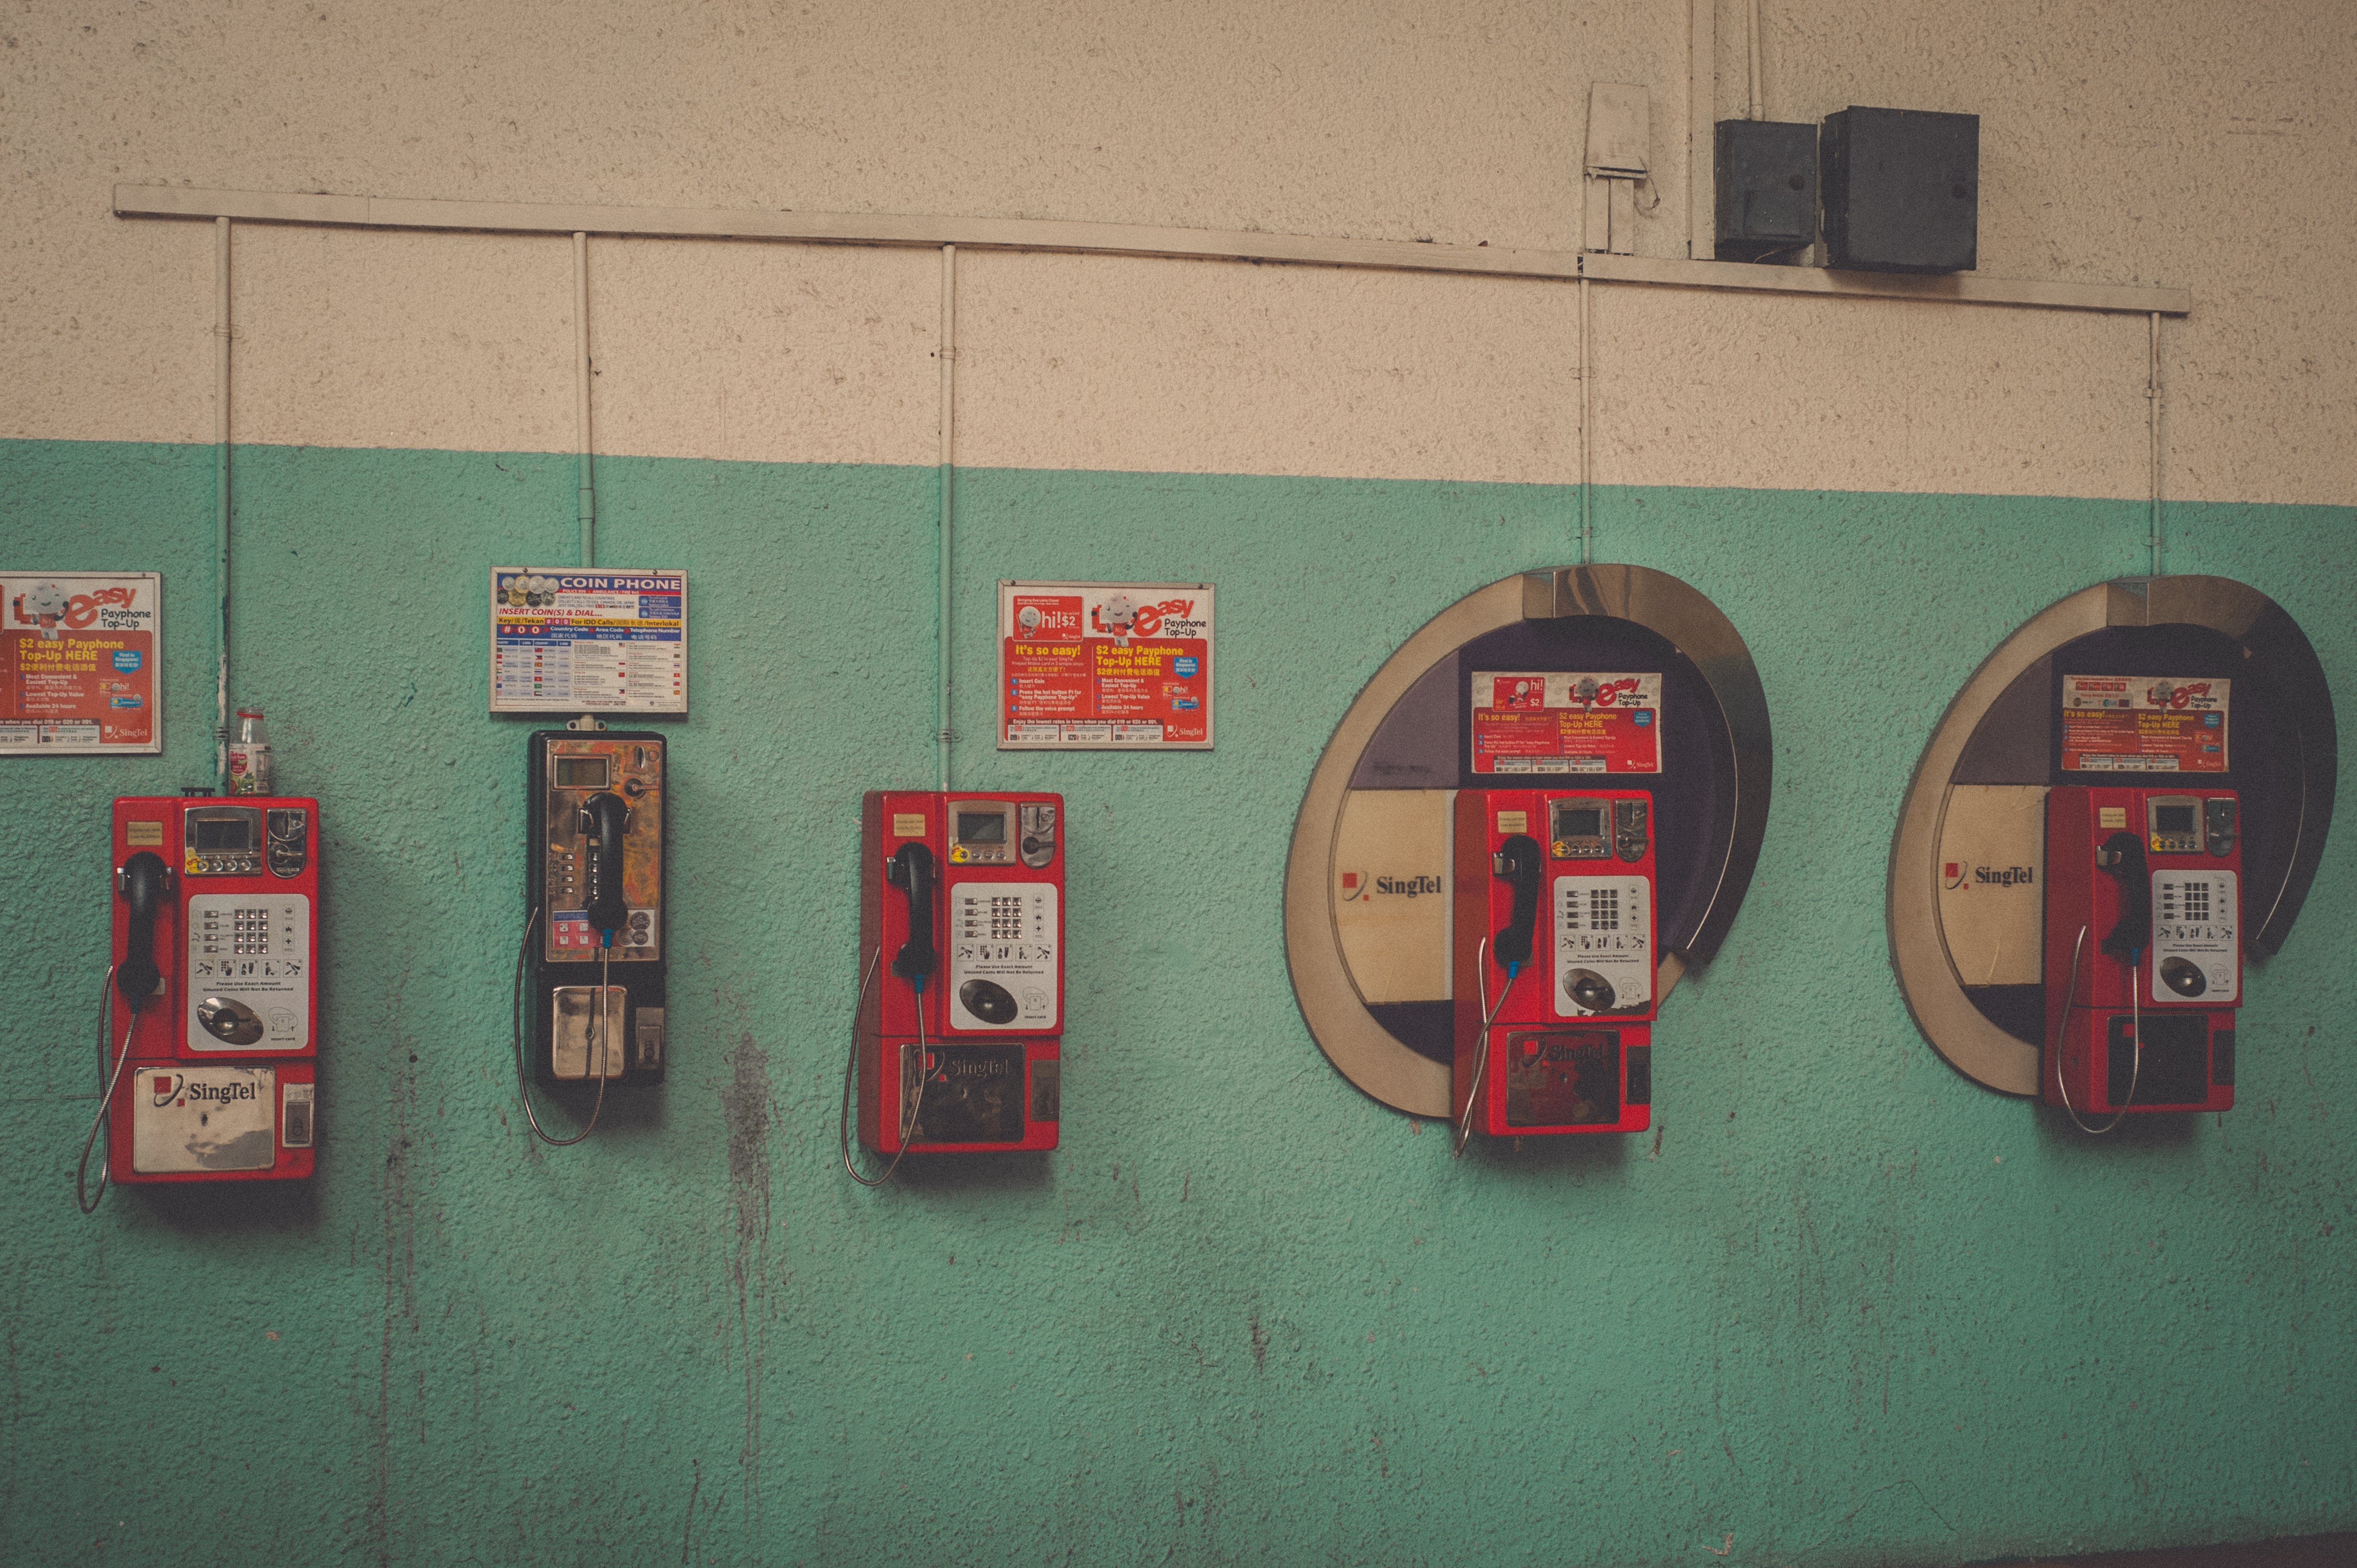 Telephones in Singapore - Notice the Space